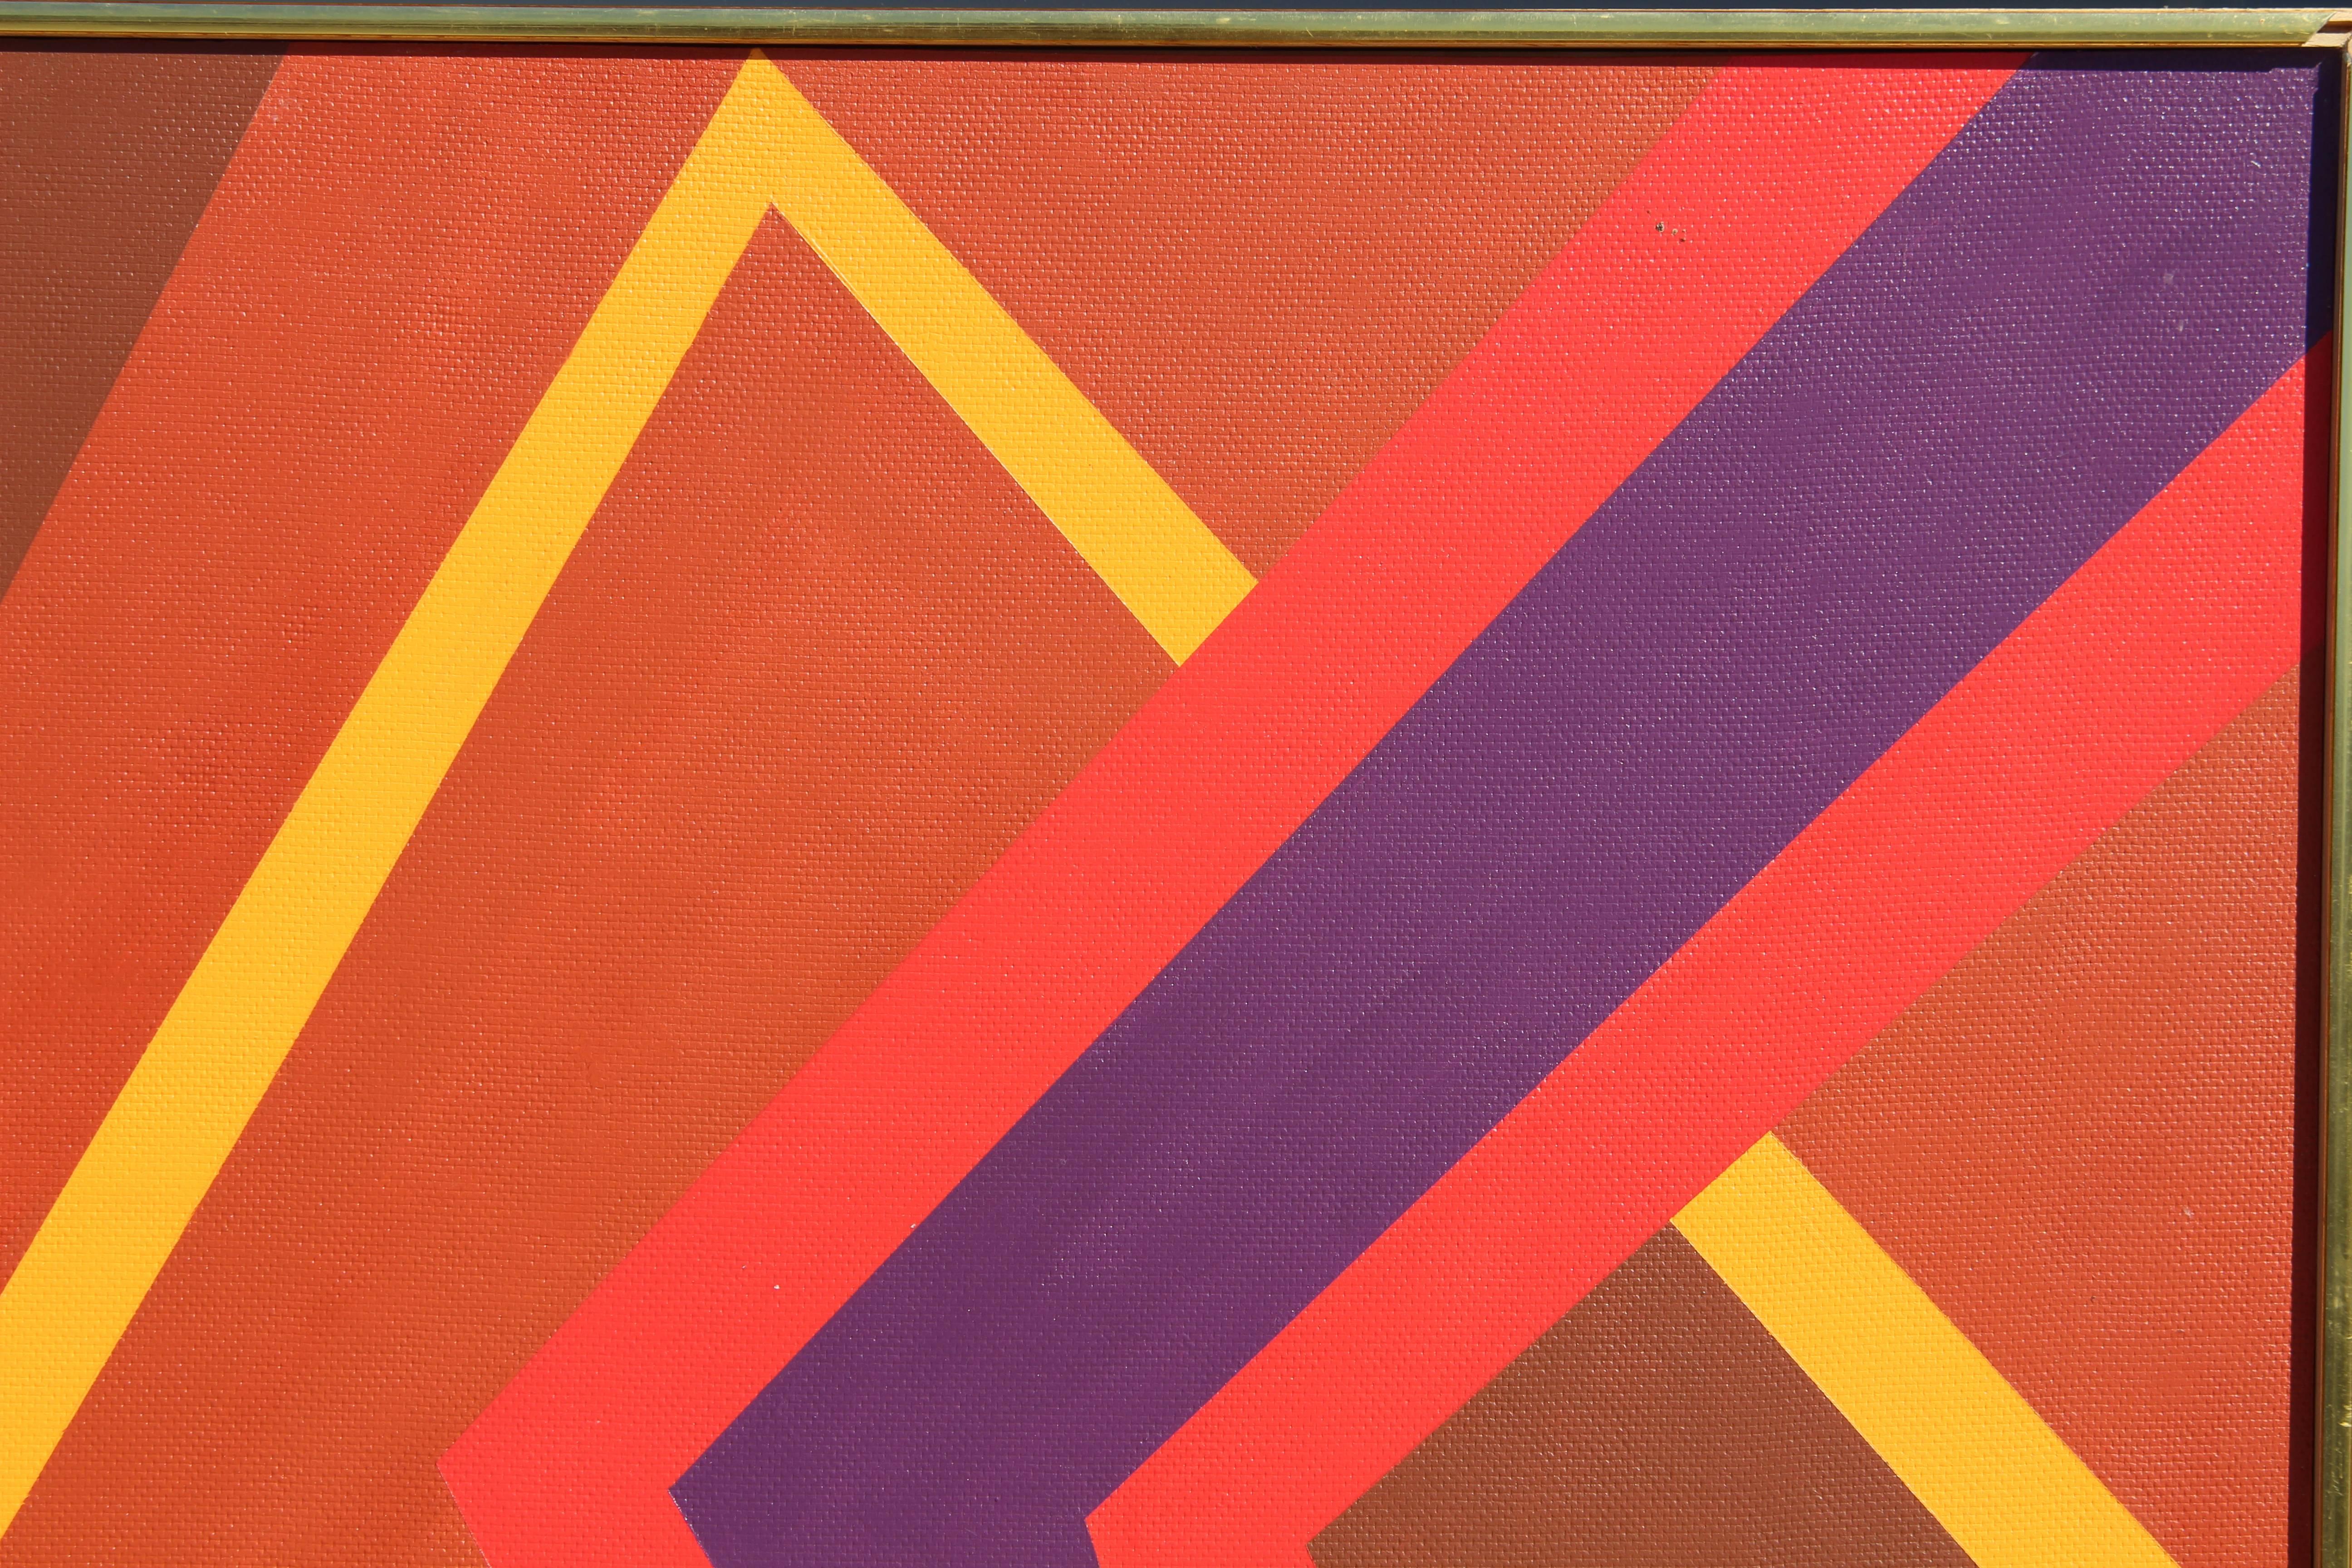 This geometric abstract oil on canvas stretched over board by Herbert Busemann (1905-1994) is painted in rust red, yellow, teal and purple. German-American Busemann was a renowned mathematician who pursued art as a creative outlet after he retired.